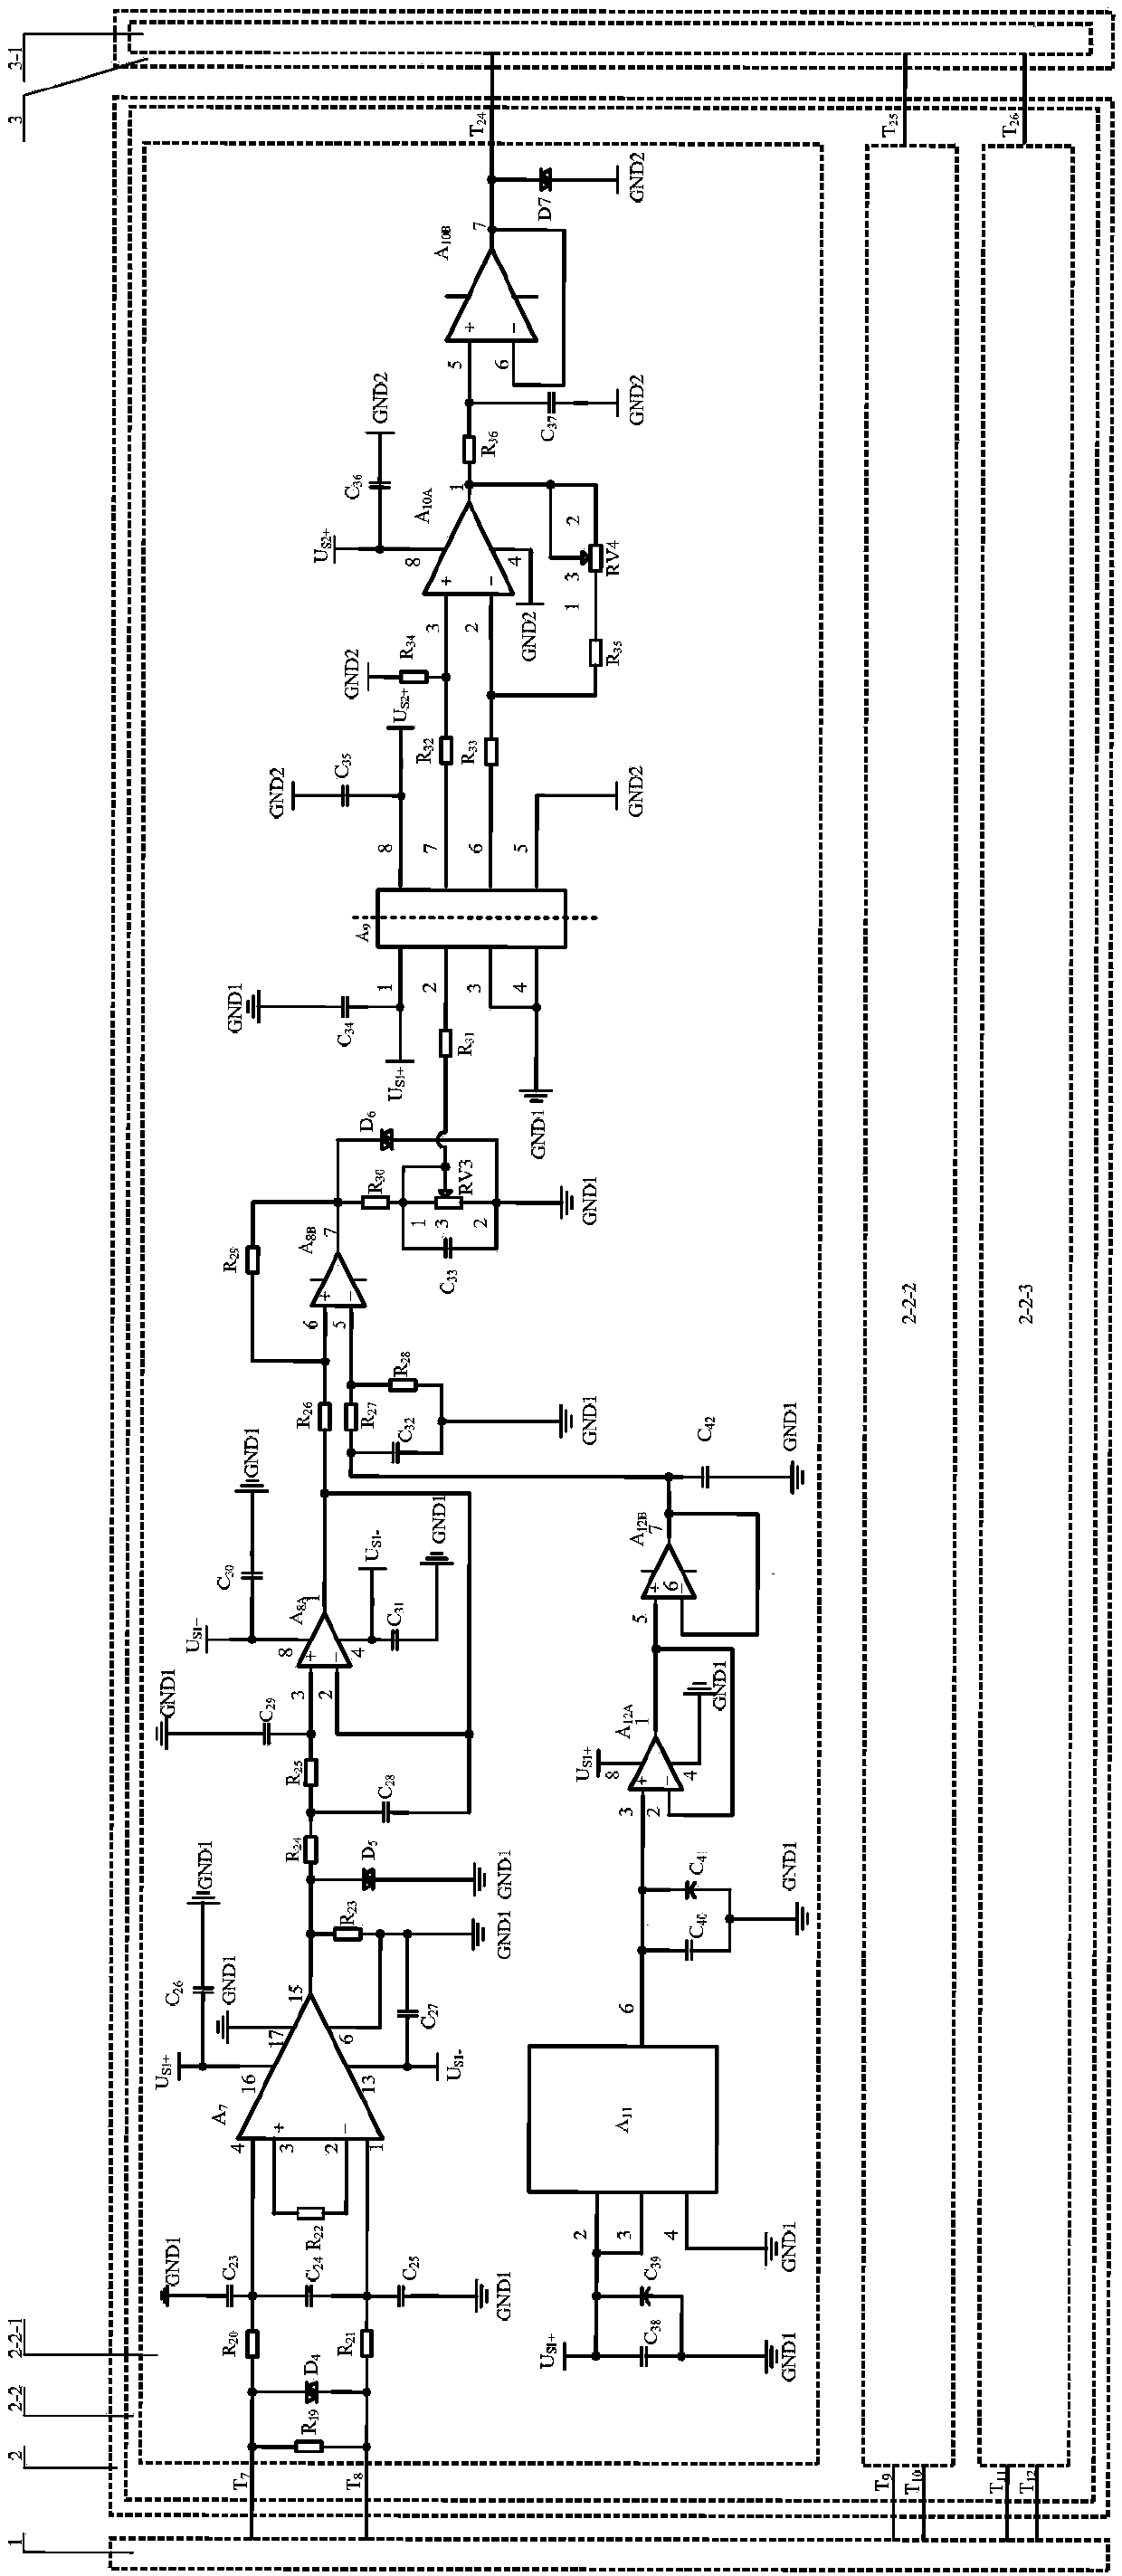 System and method for monitoring critical state of power electronic device in strong electromagnetic environment